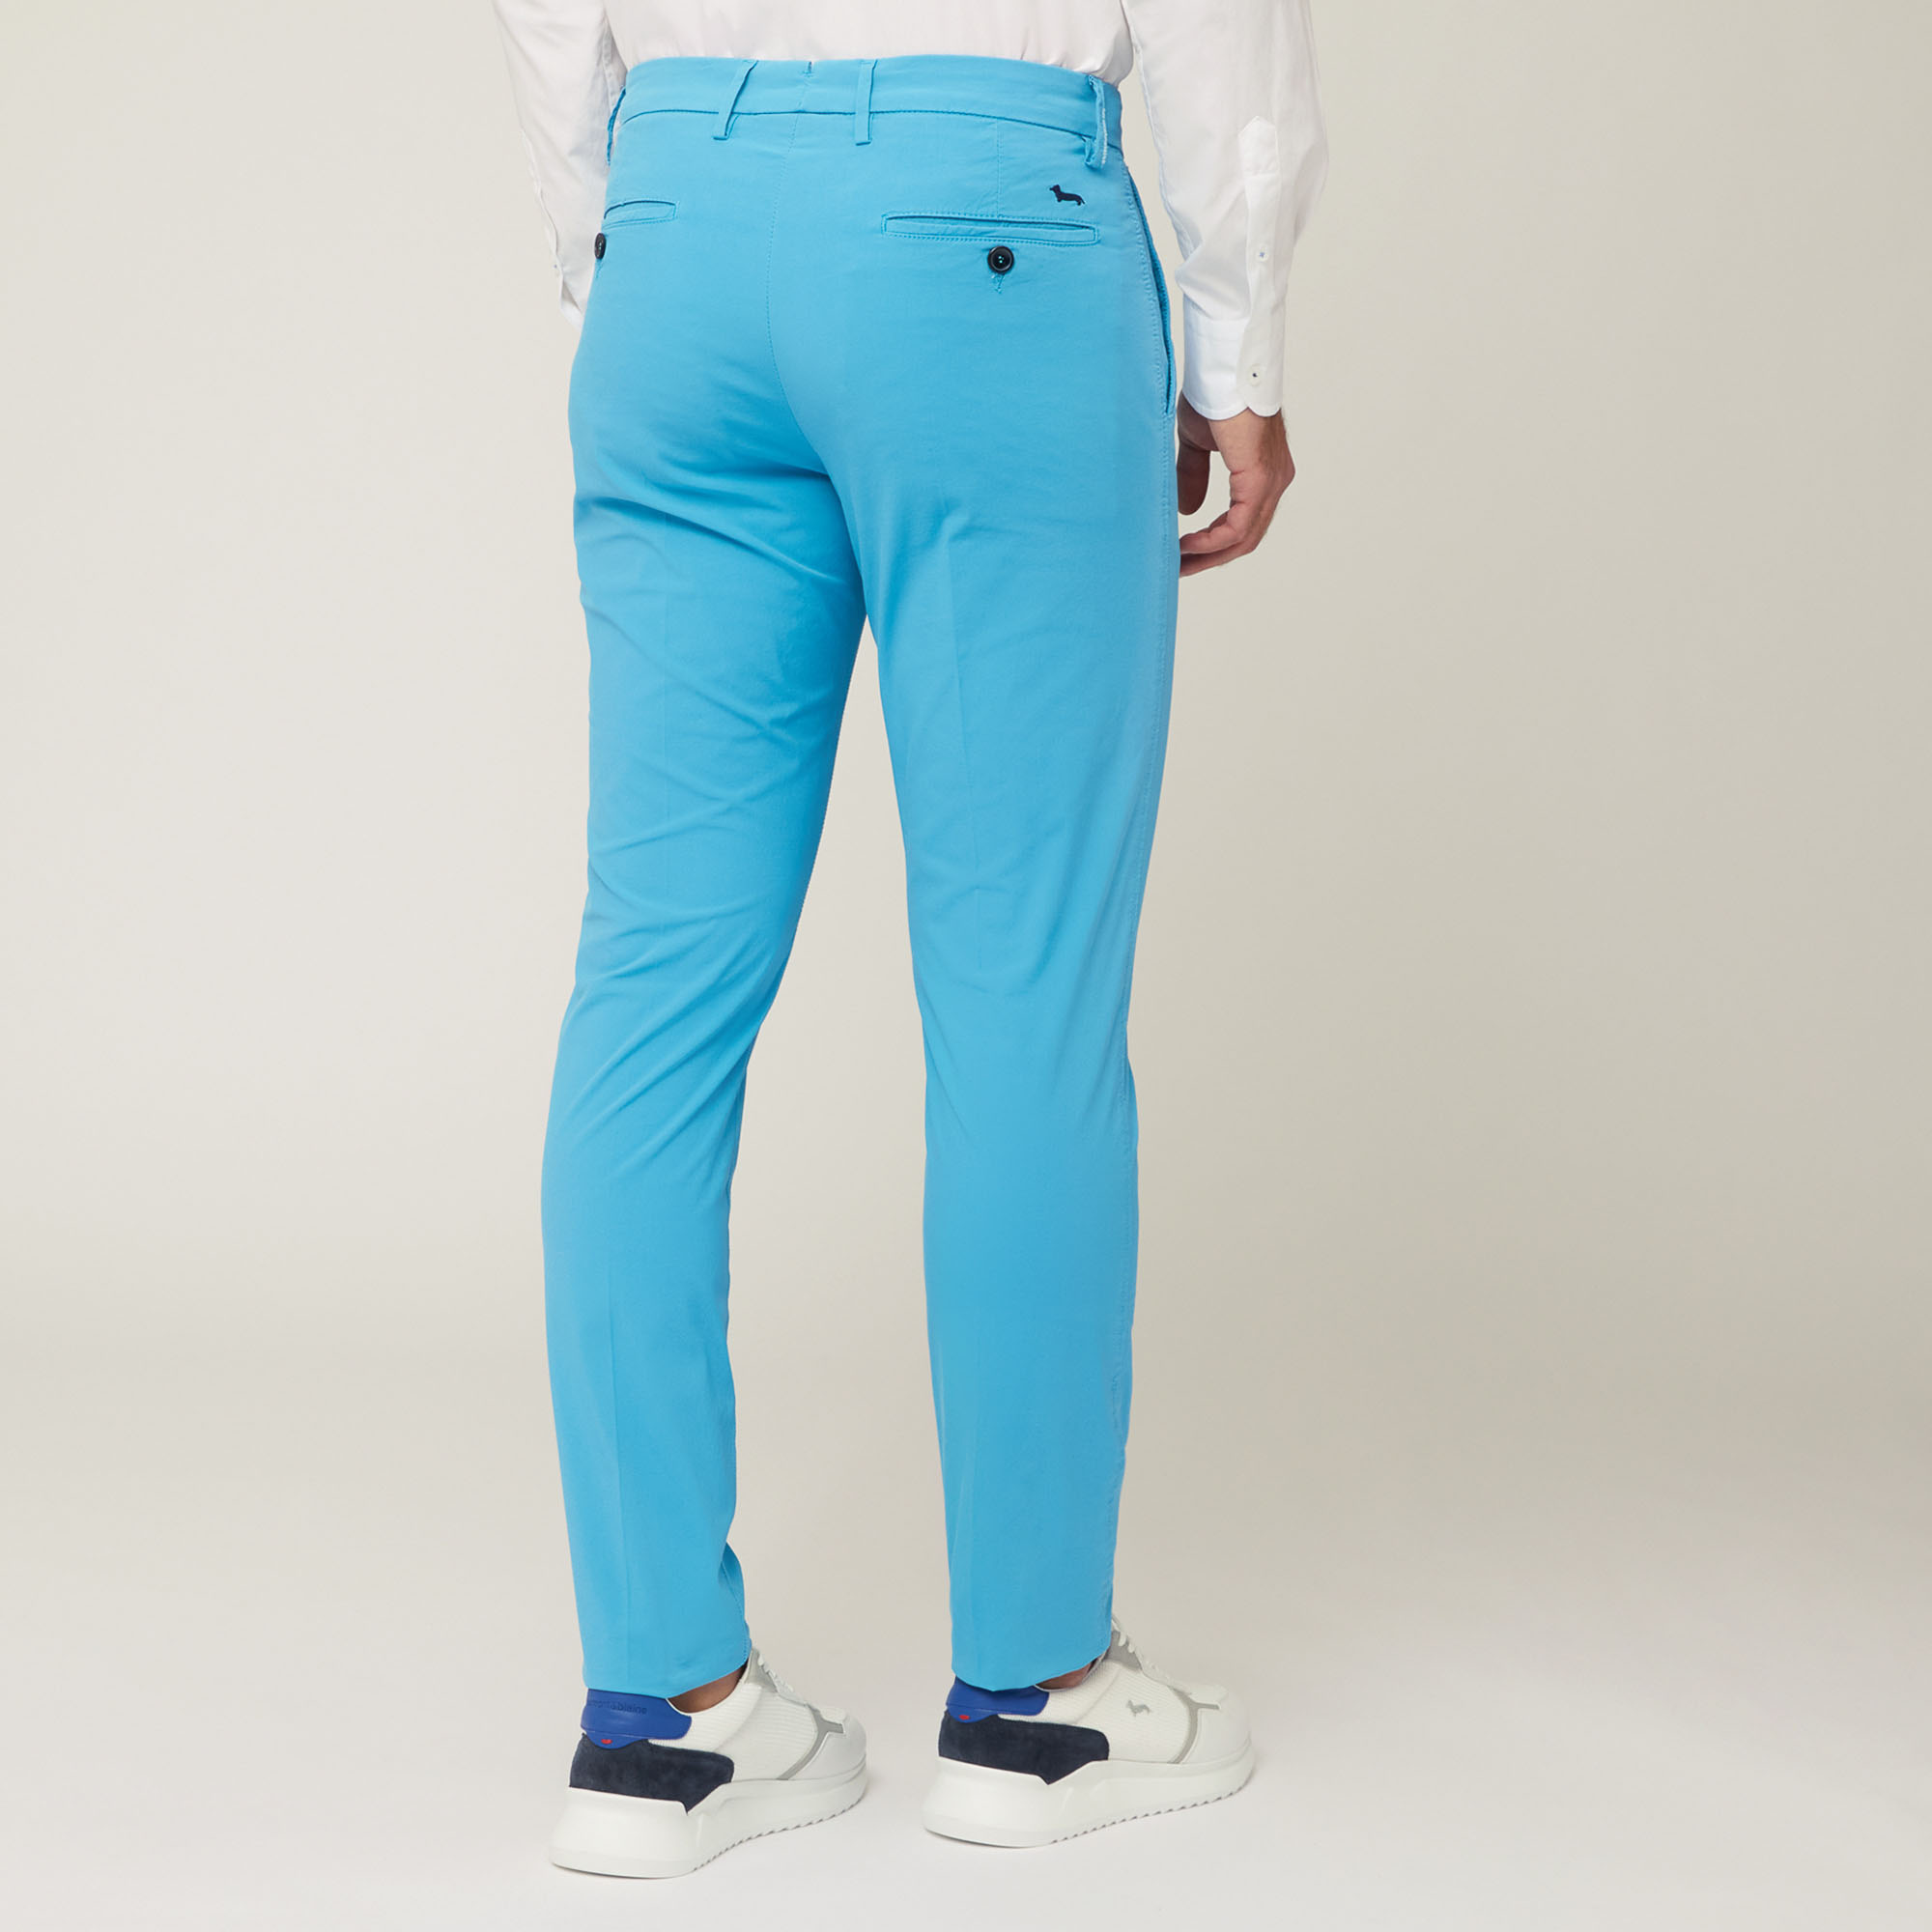 Chino-Hose Narrow Fit, Azur, large image number 1